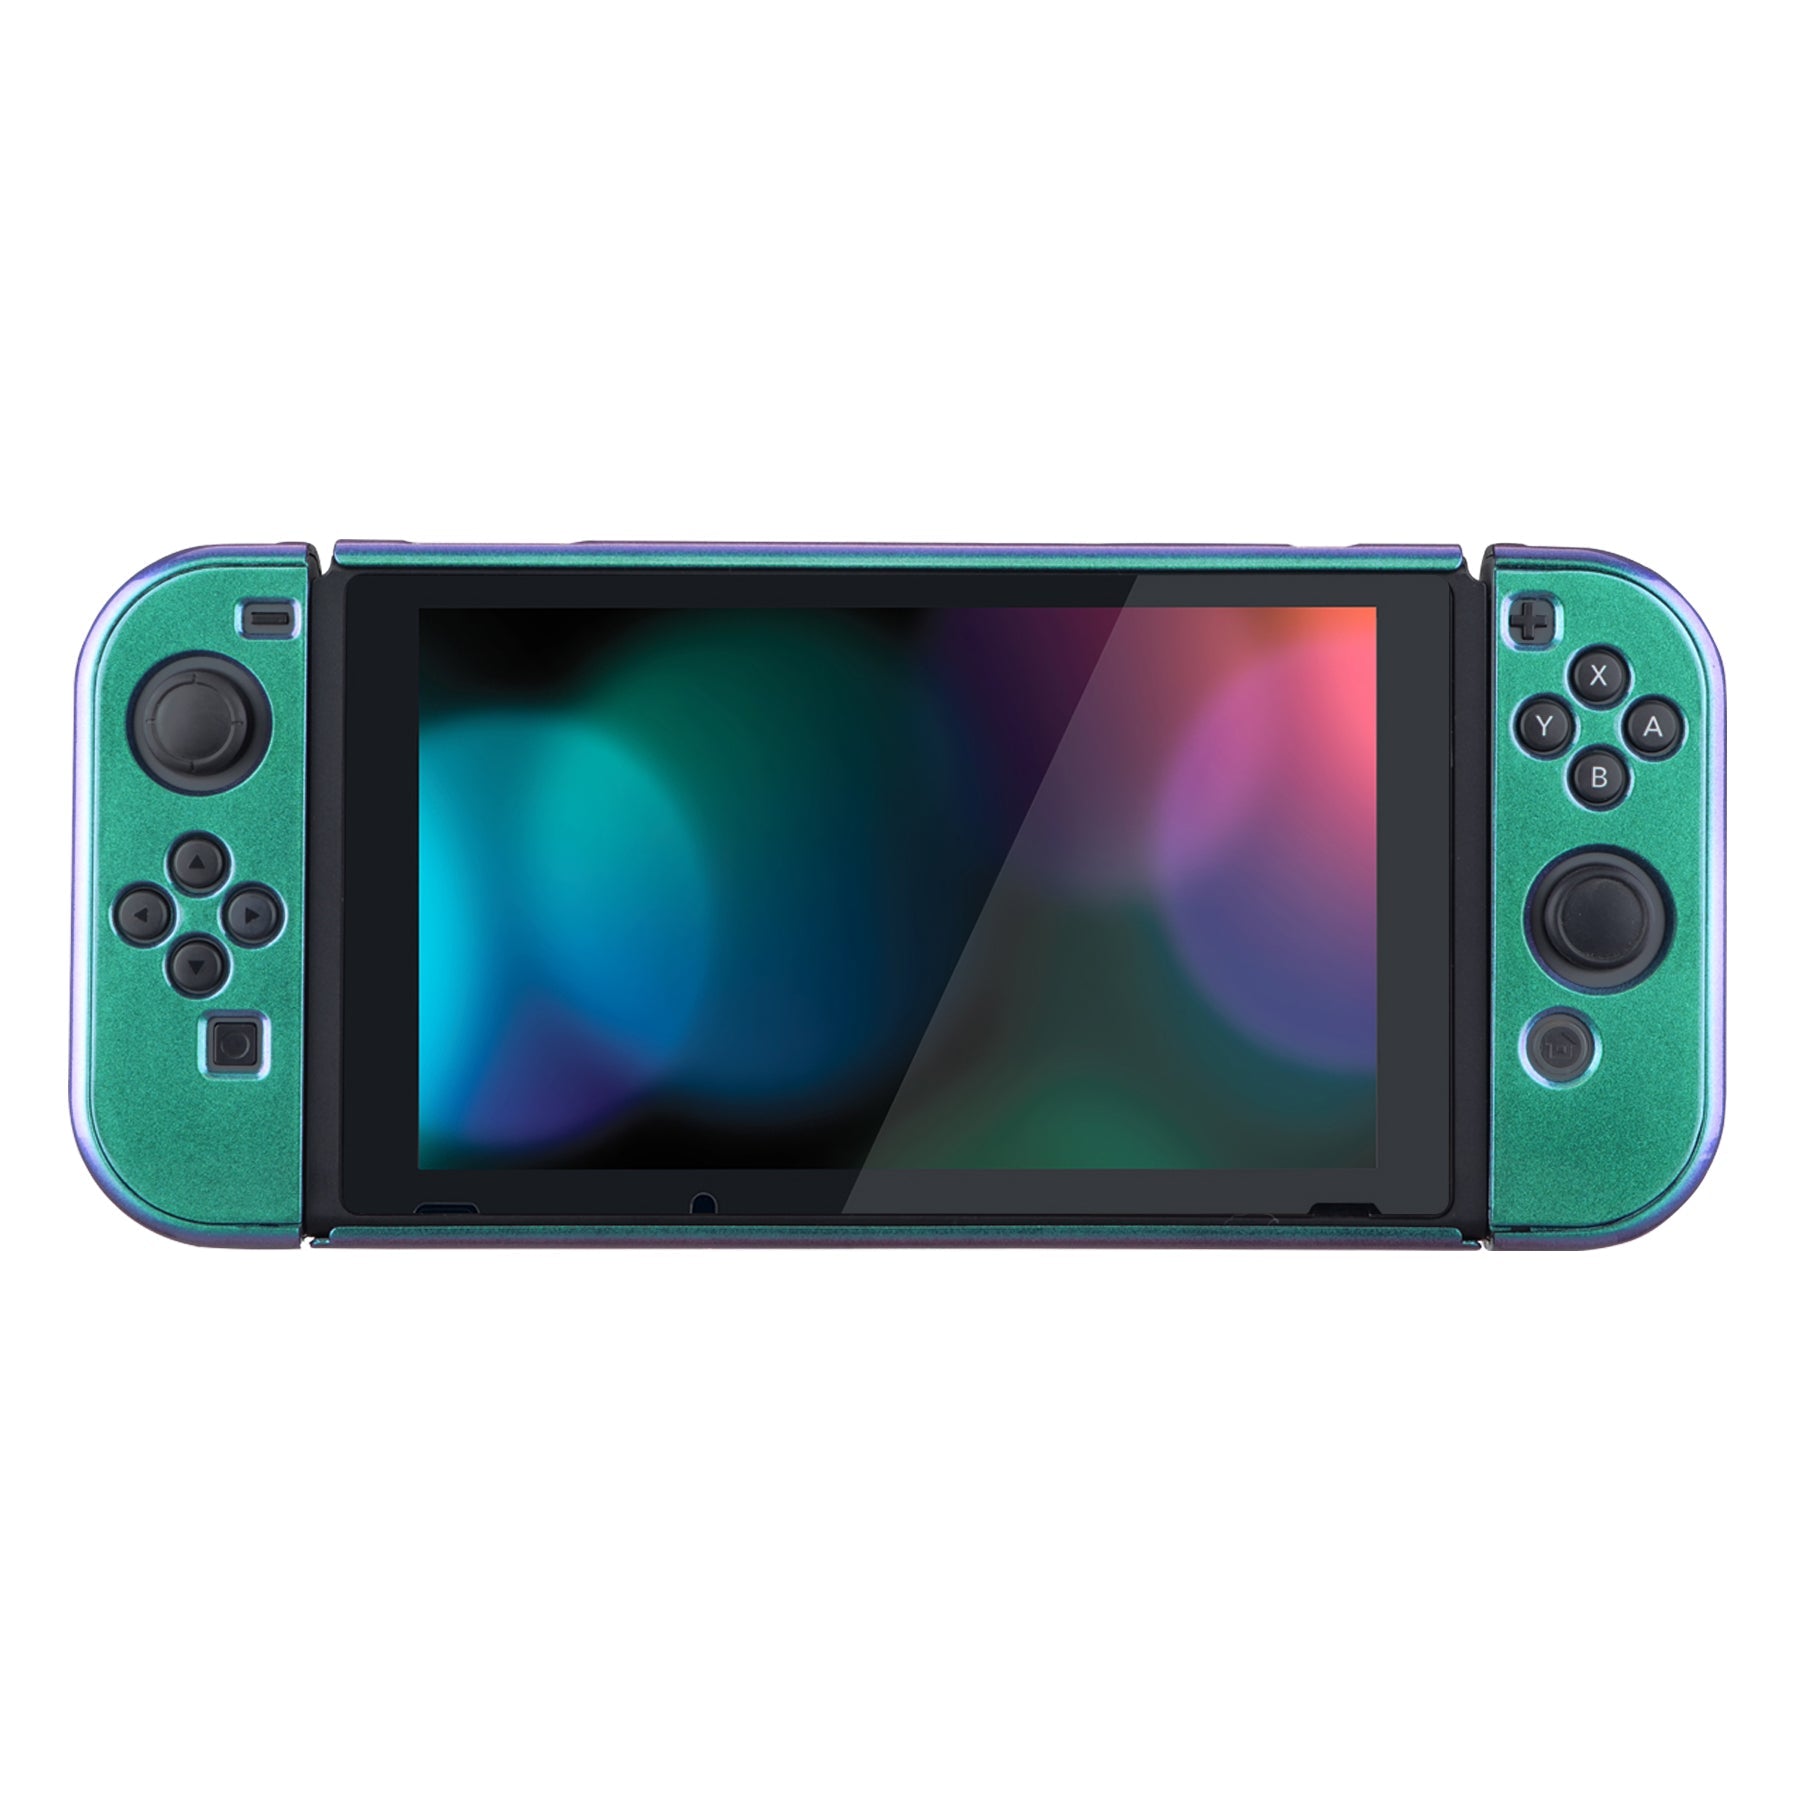 PlayVital Chameleon Green Purple Glossy Back Cover for NS Switch Console, NS Joycon Handheld Controller Separable Protector Hard Shell, Customized Dockable Protective Case for NS Switch - NTP304 PlayVital